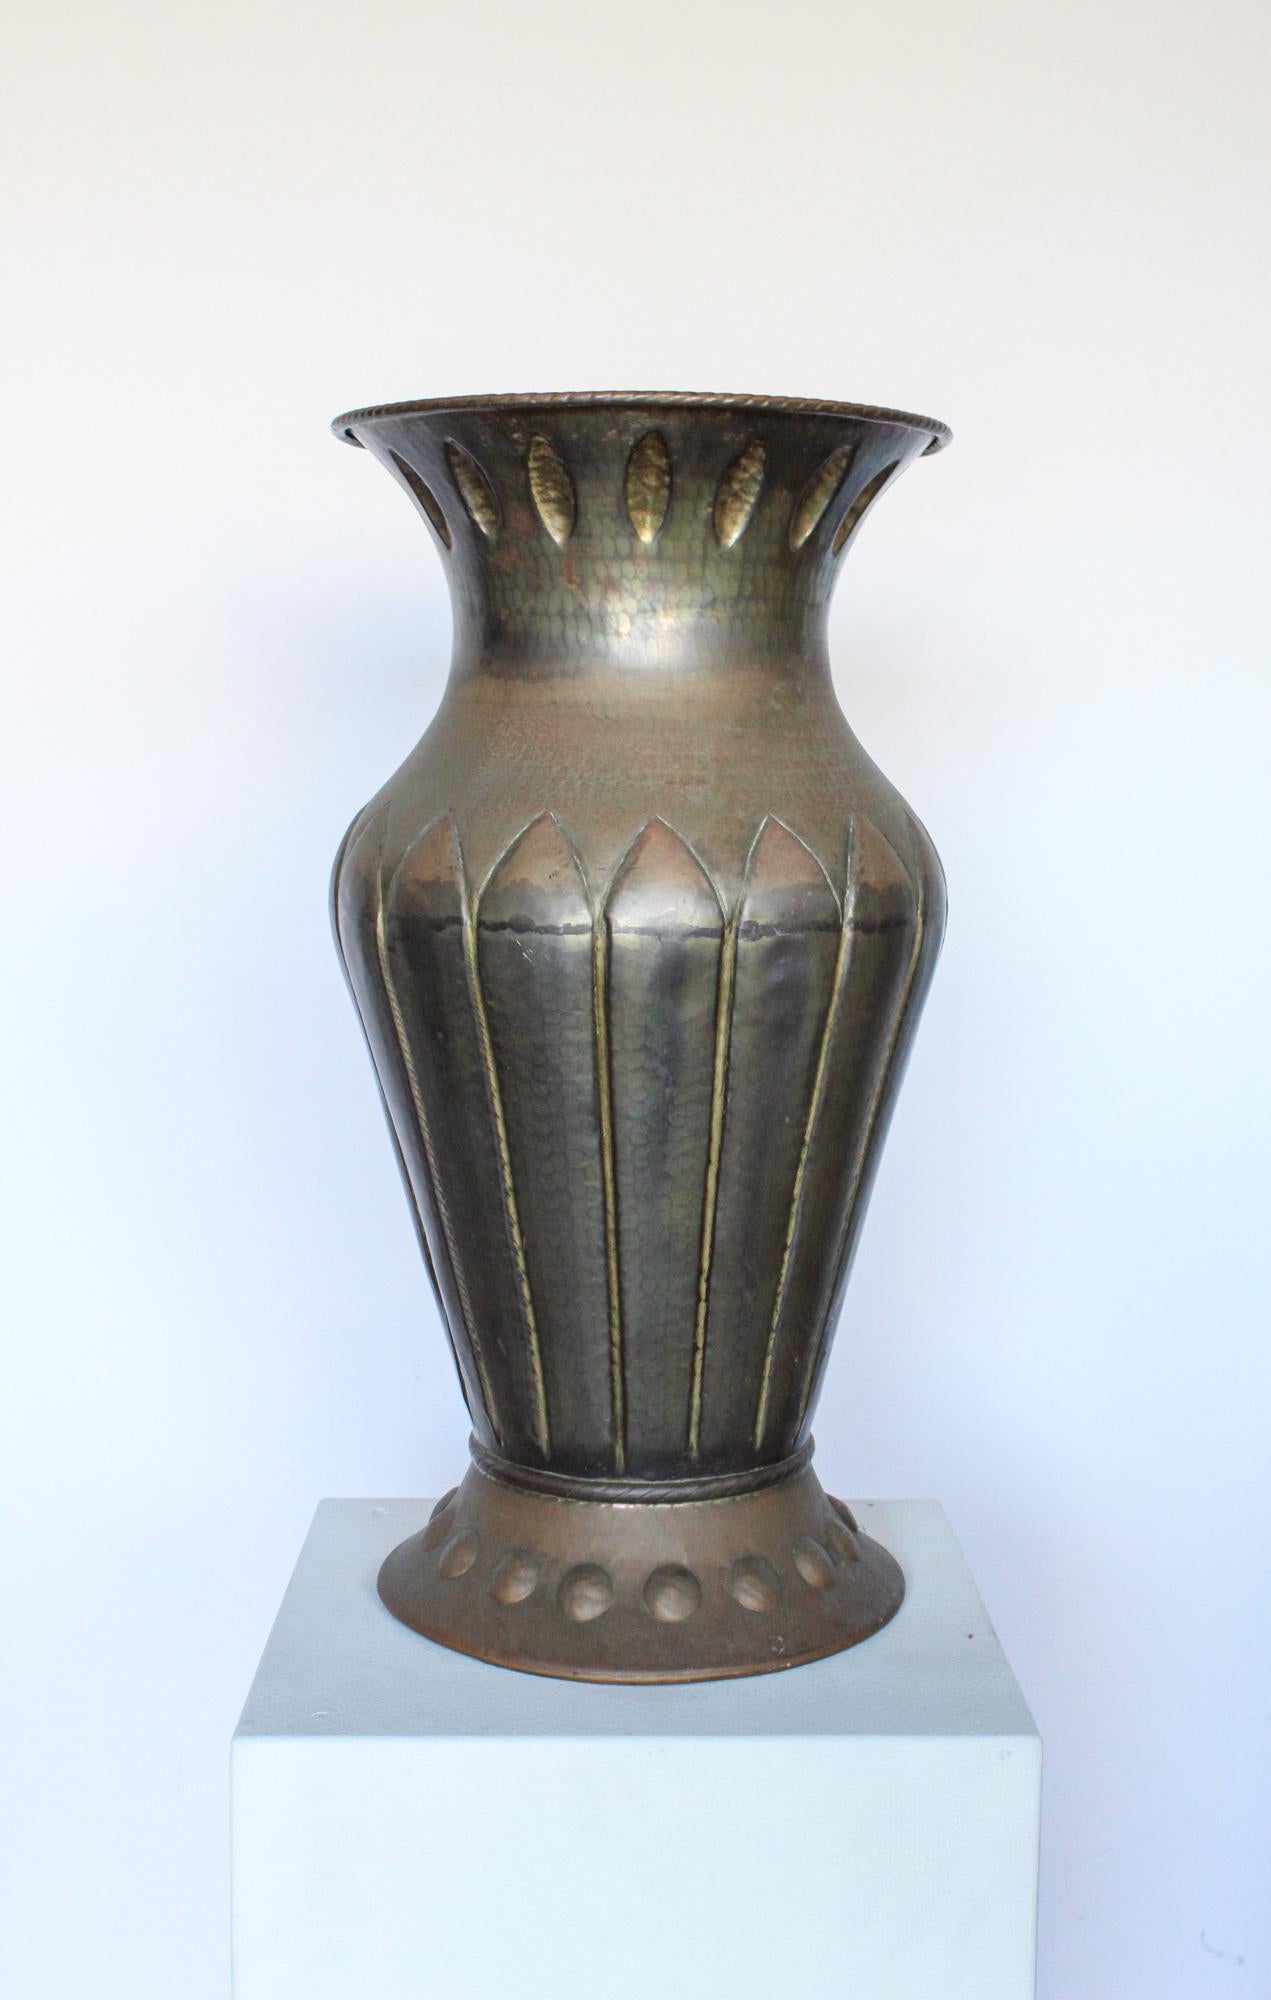 Monumental Art Deco hand-hammered copper vase vessel made in Italy, 1920s. Vase has a strong resemblance to Vittorio Zecchin designs. We have left vase as found with incredible patina.

We have included a large quantity of images.

Versatile